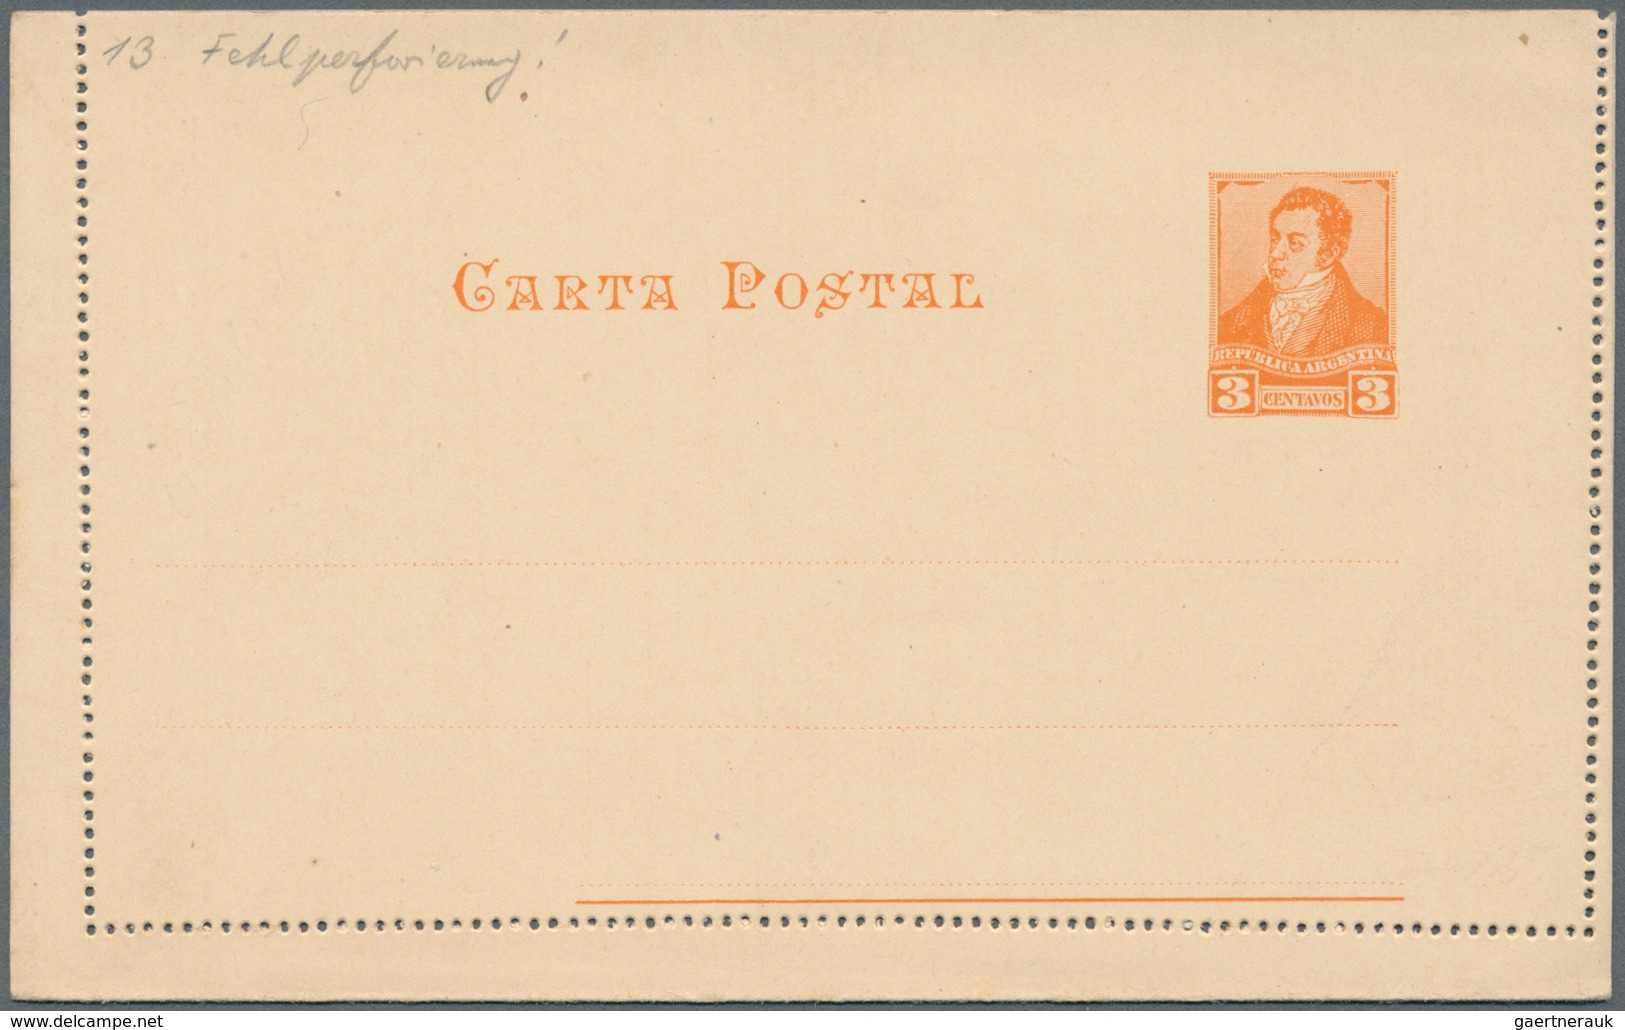 Argentinien - Ganzsachen: 1892, Stationery Letter Card Rivadavia 3 C Orange With Perforation Shifted - Postal Stationery